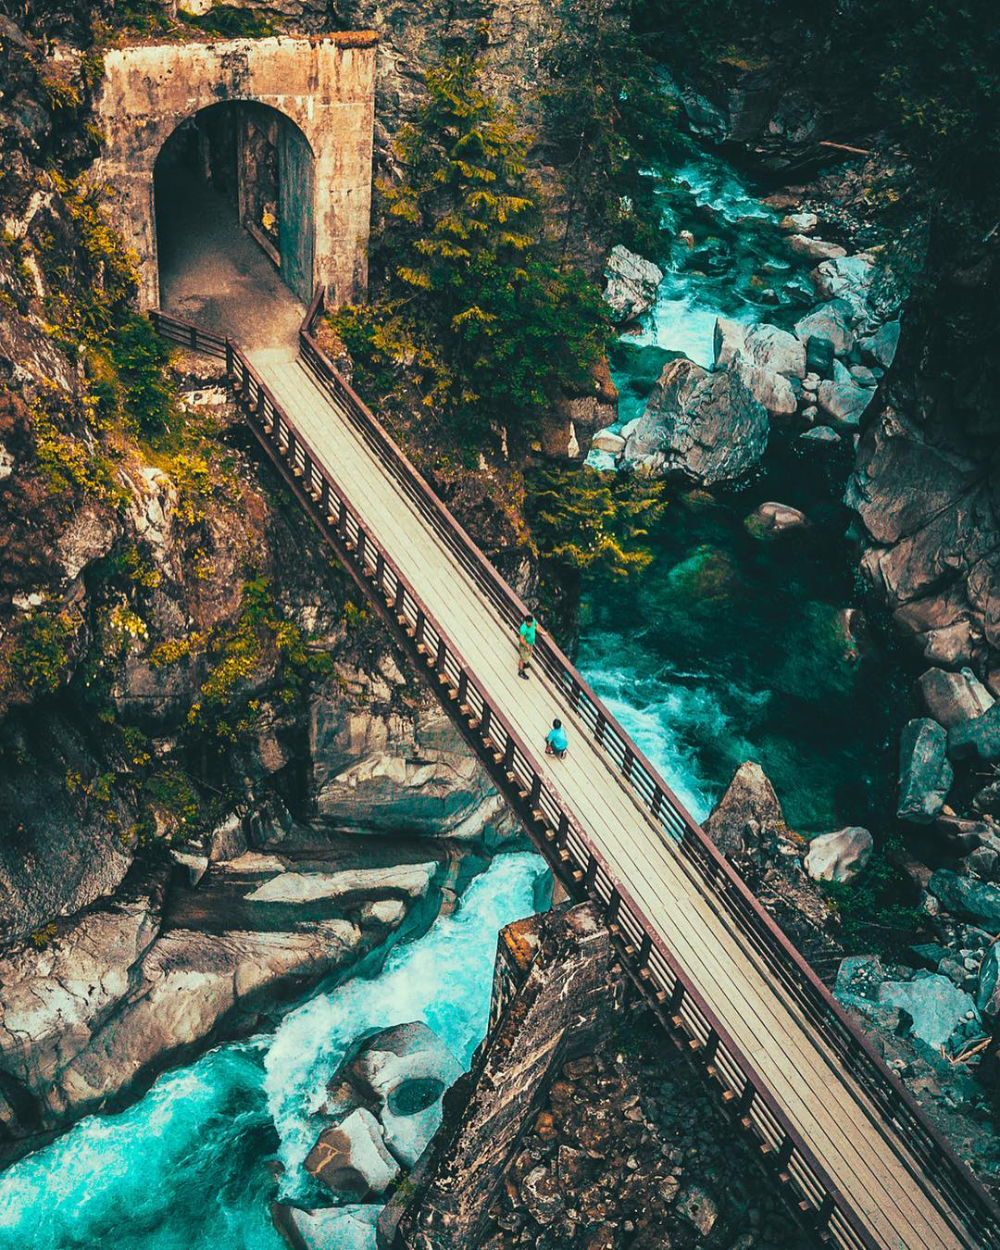 This 3-km Trail Takes You To Cliffs, Caves And An Old Canyon In BC -   12 holiday Photography tumblr ideas